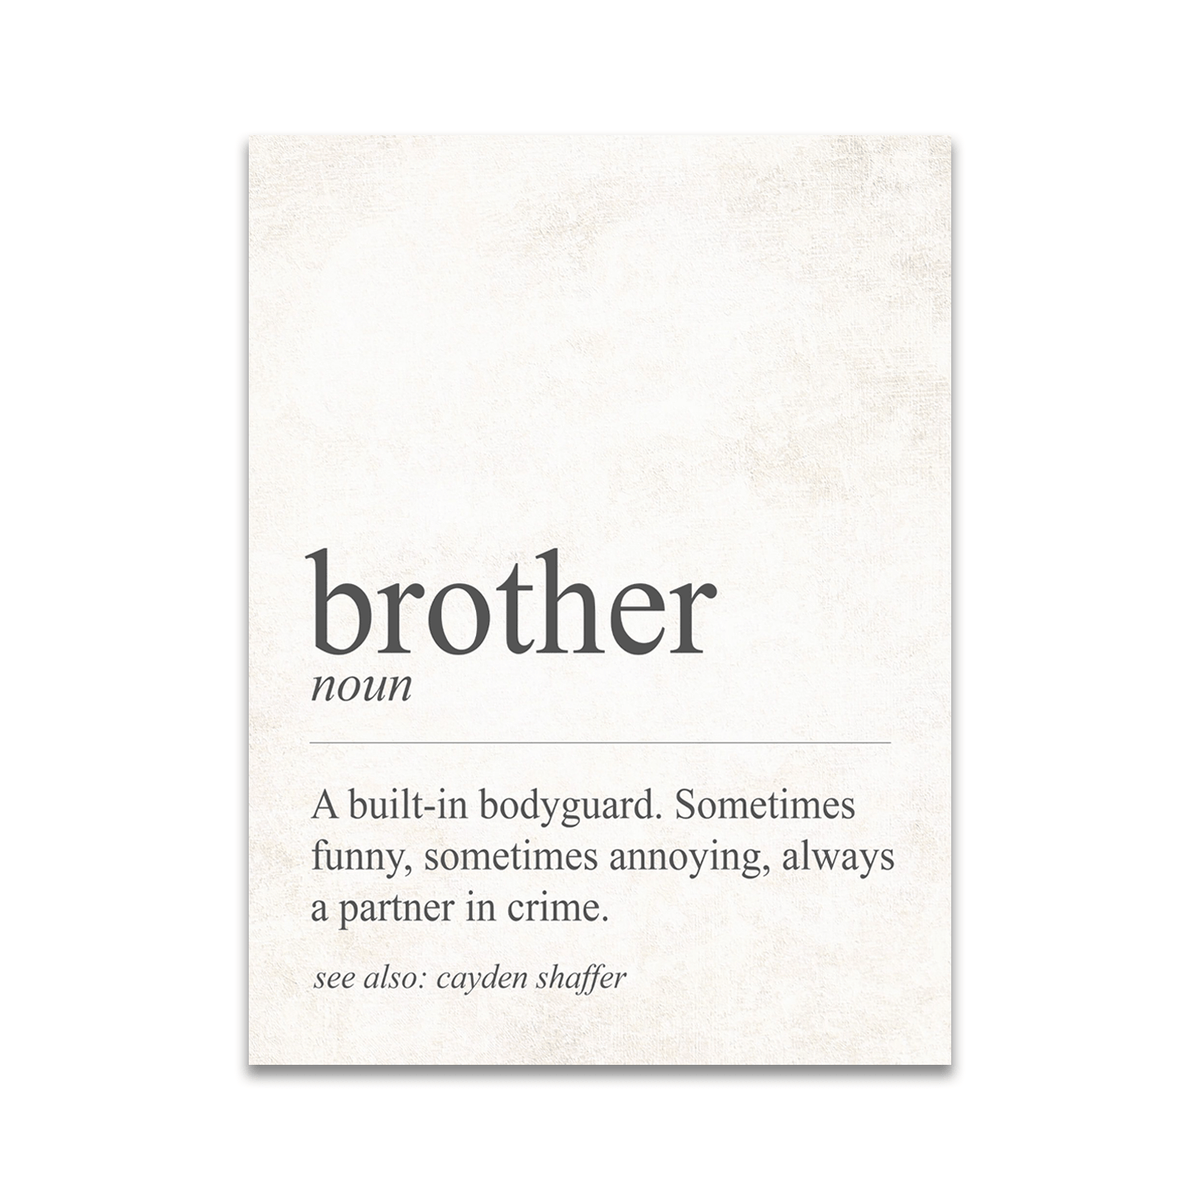 personalized sign for your brother